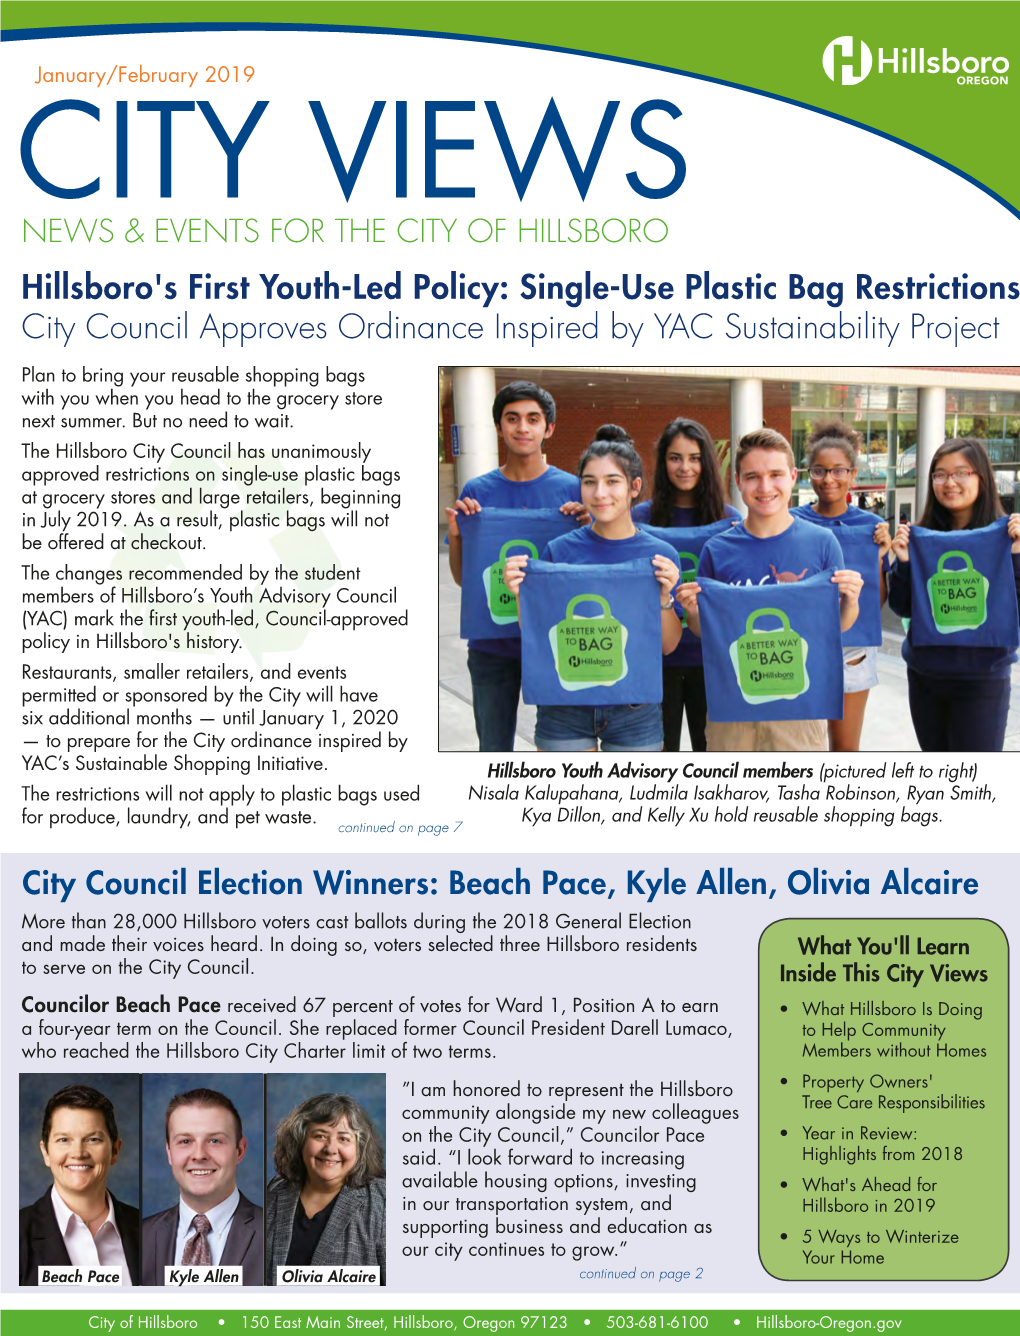 Single-Use Plastic Bag Restrictions City Council Approves Ordinance Inspired by YAC Sustainability Project